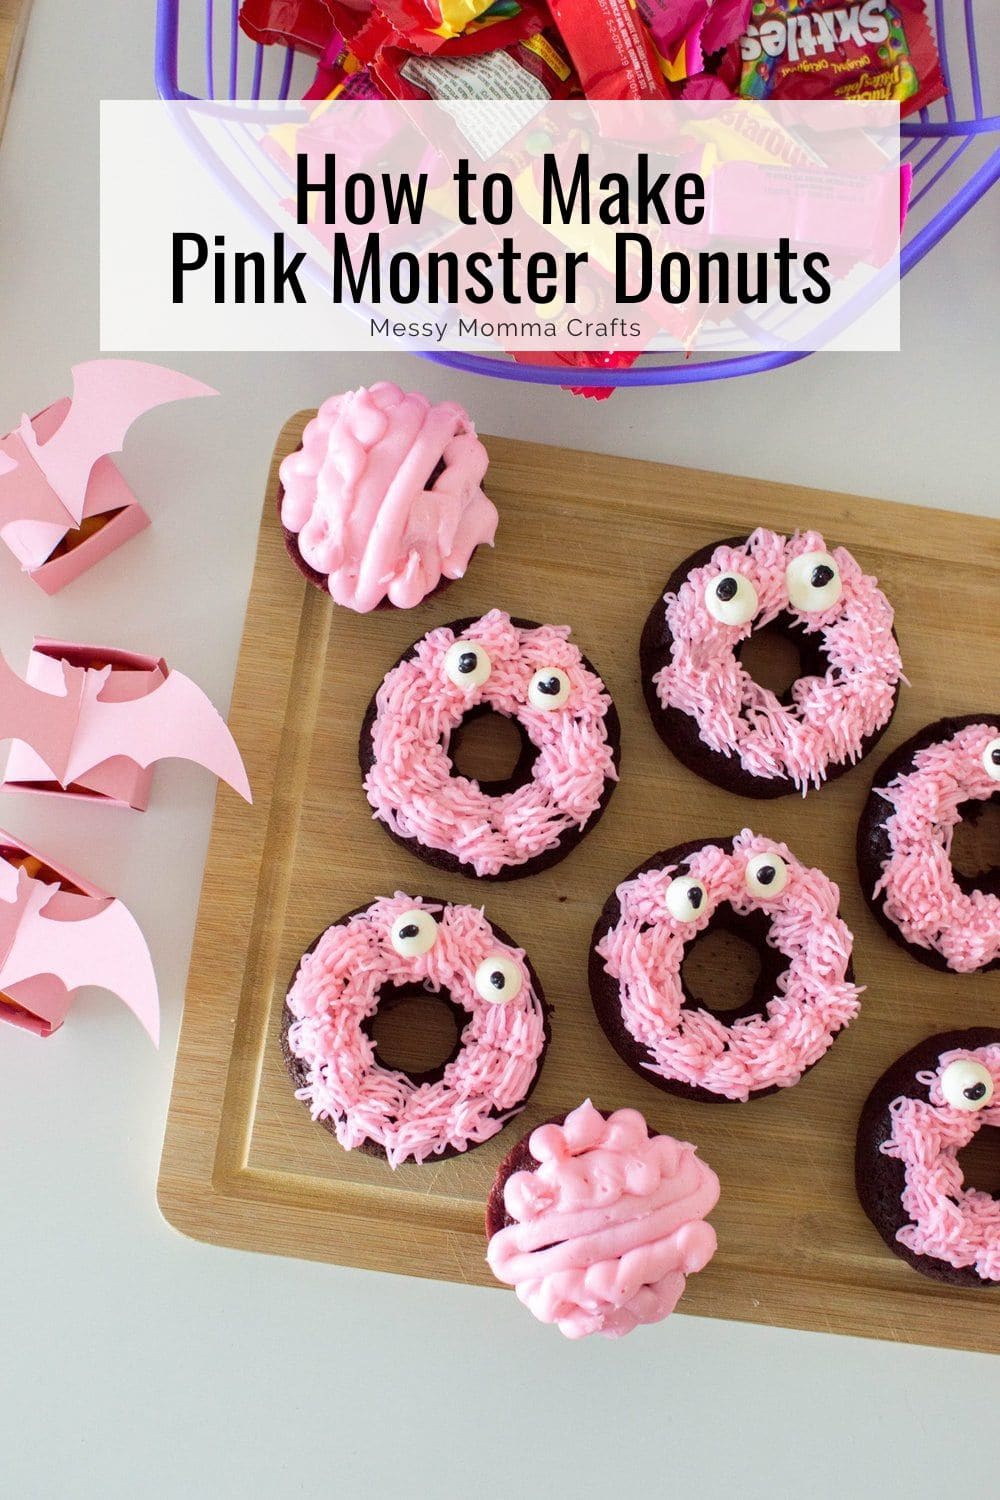 How to make pink monster donuts.